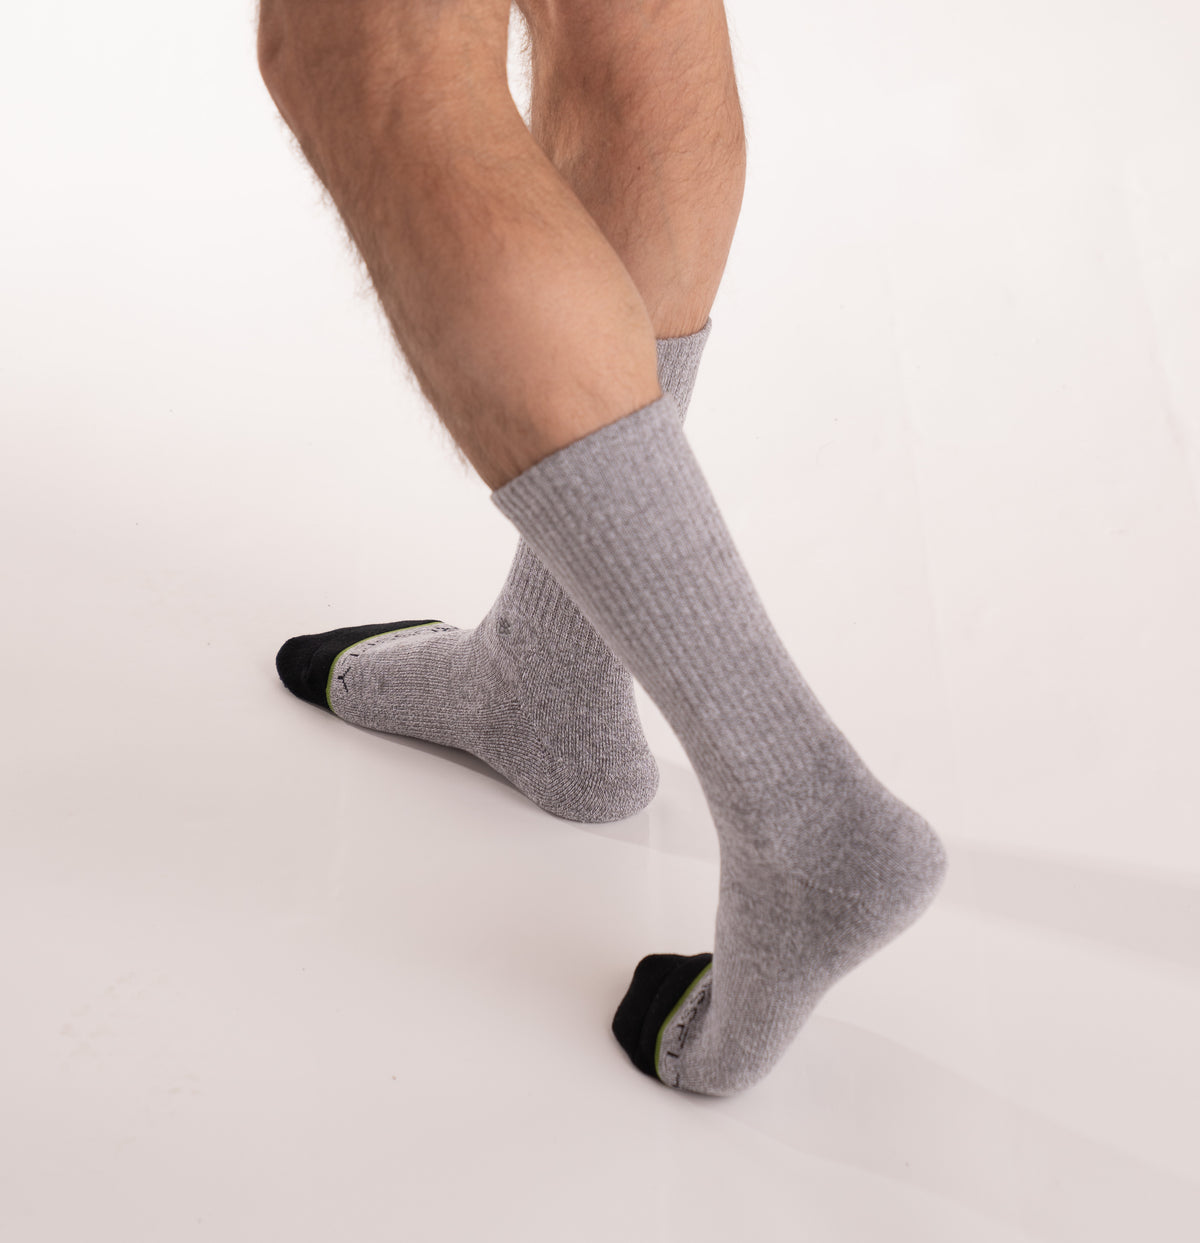 Crossfly men&#39;s Original Crew Socks in grey from the Everyday series, featuring Flat Toe Seams and 360 Hold.